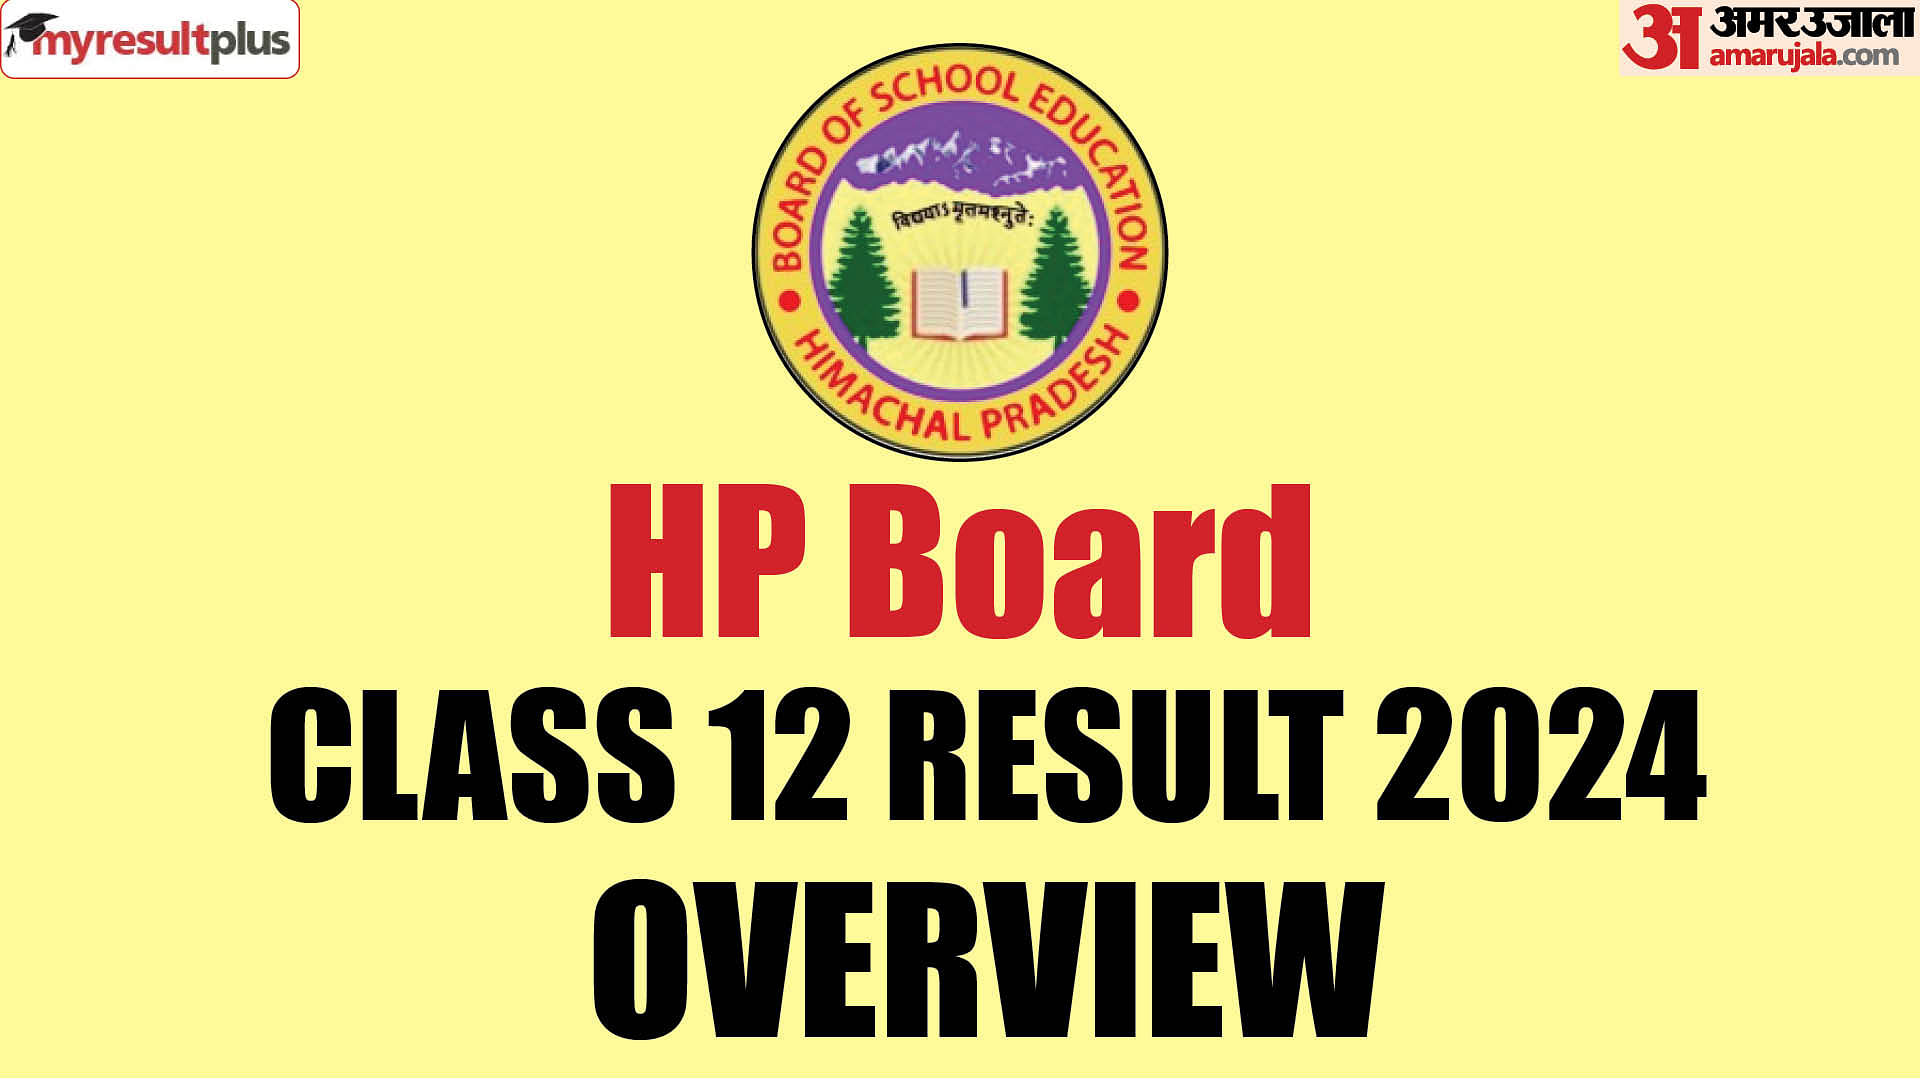 HP Board class 12 Result 2024 declared, Check the overview, pass percentage and all details here